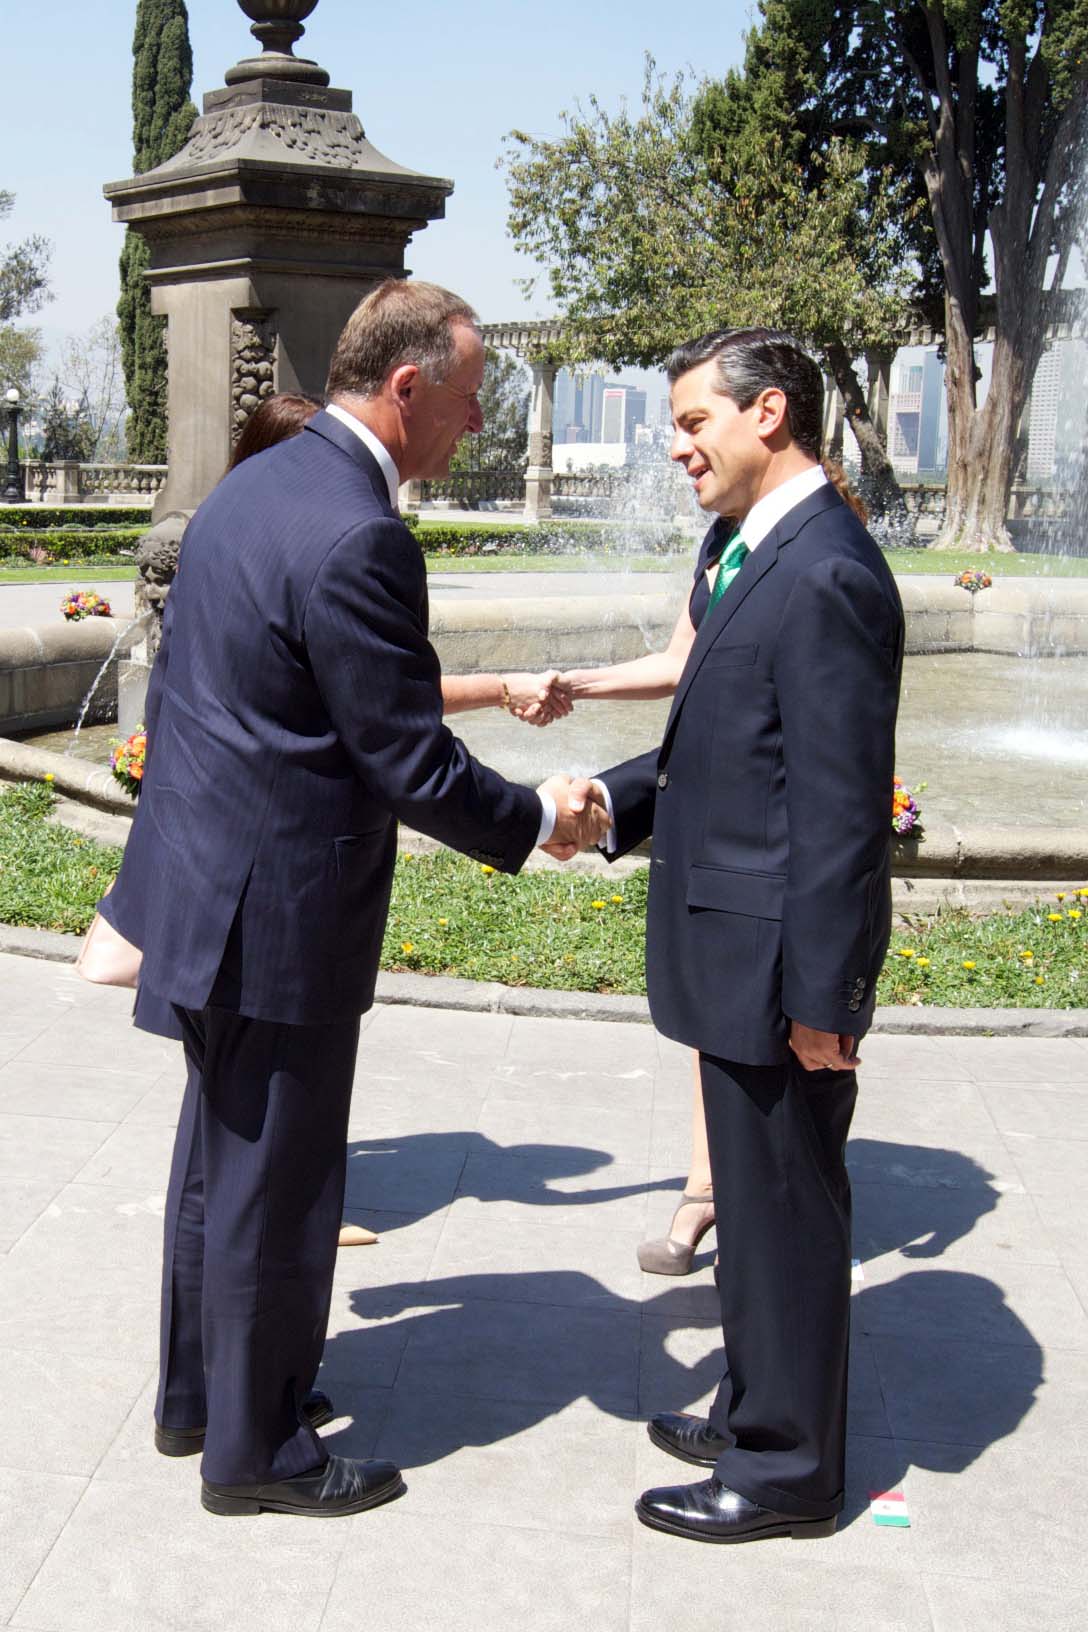 two men in suits shake hands at an open fountain